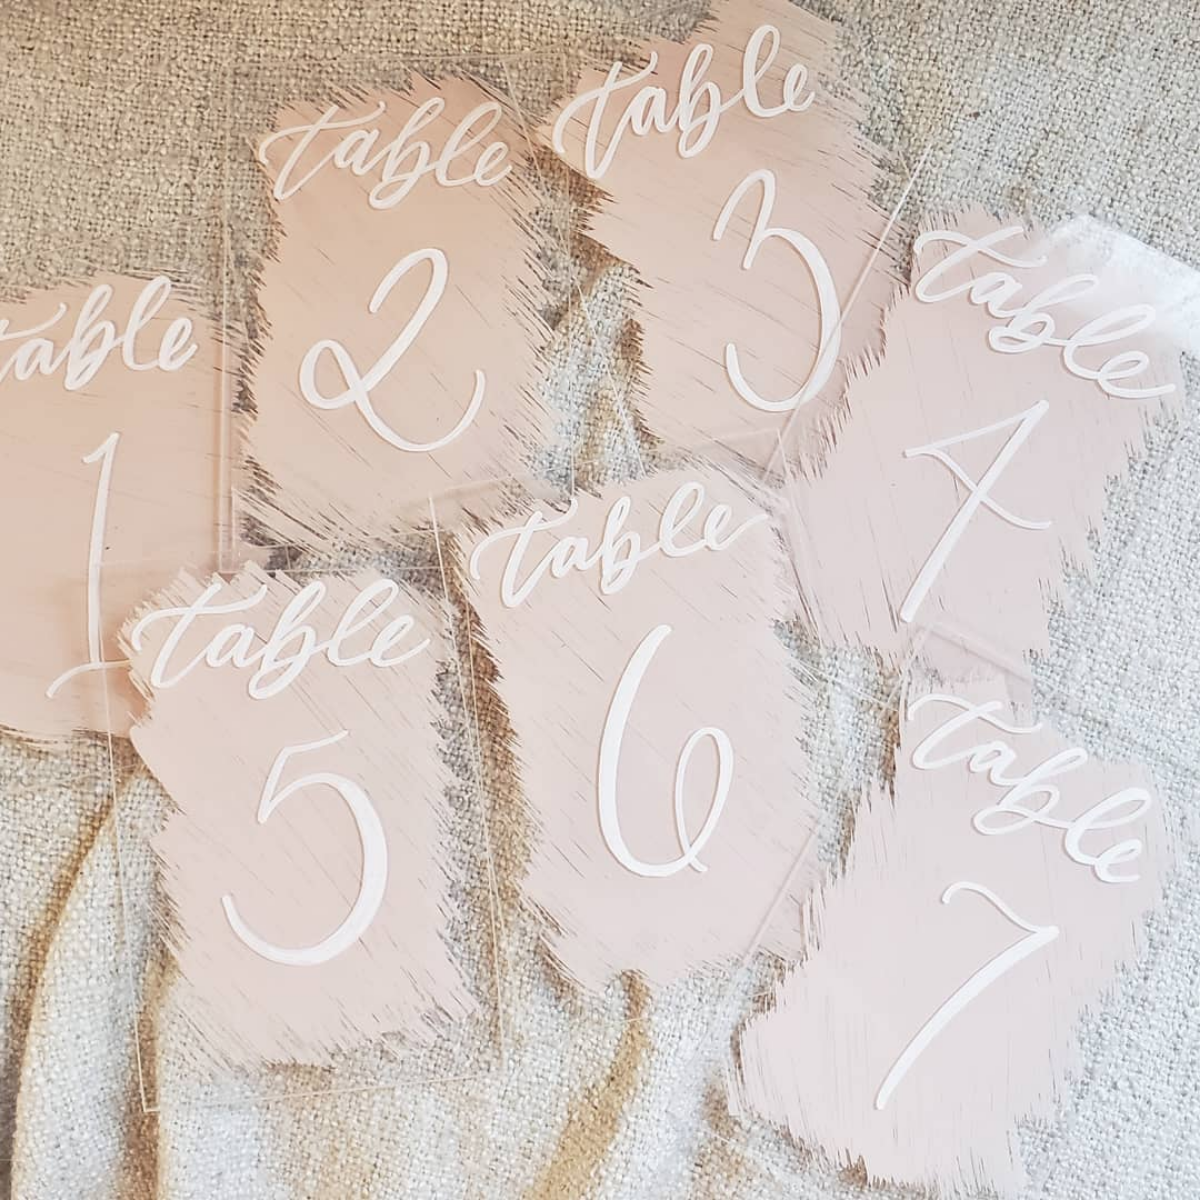 Hand Painted Acrylic Wedding Table Numbers by Mulberry Market Designs